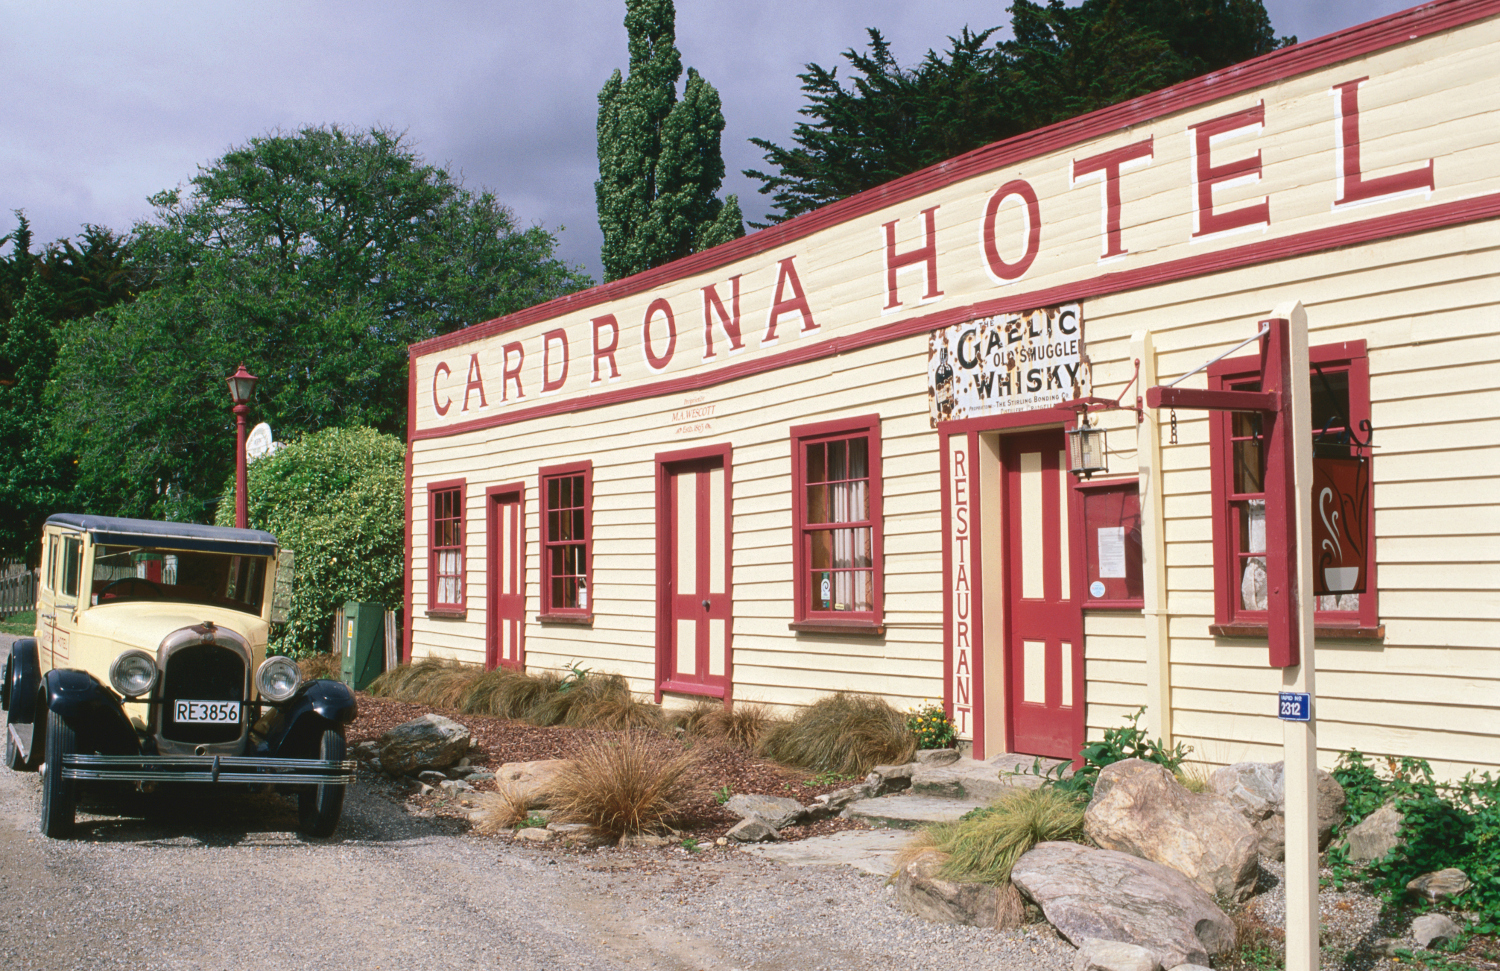 Suck in the fresh mountain air at the Cardrona Hotel's beer garden. Image by Glenn Van Der Knijff / Lonely Planet Images / Getty